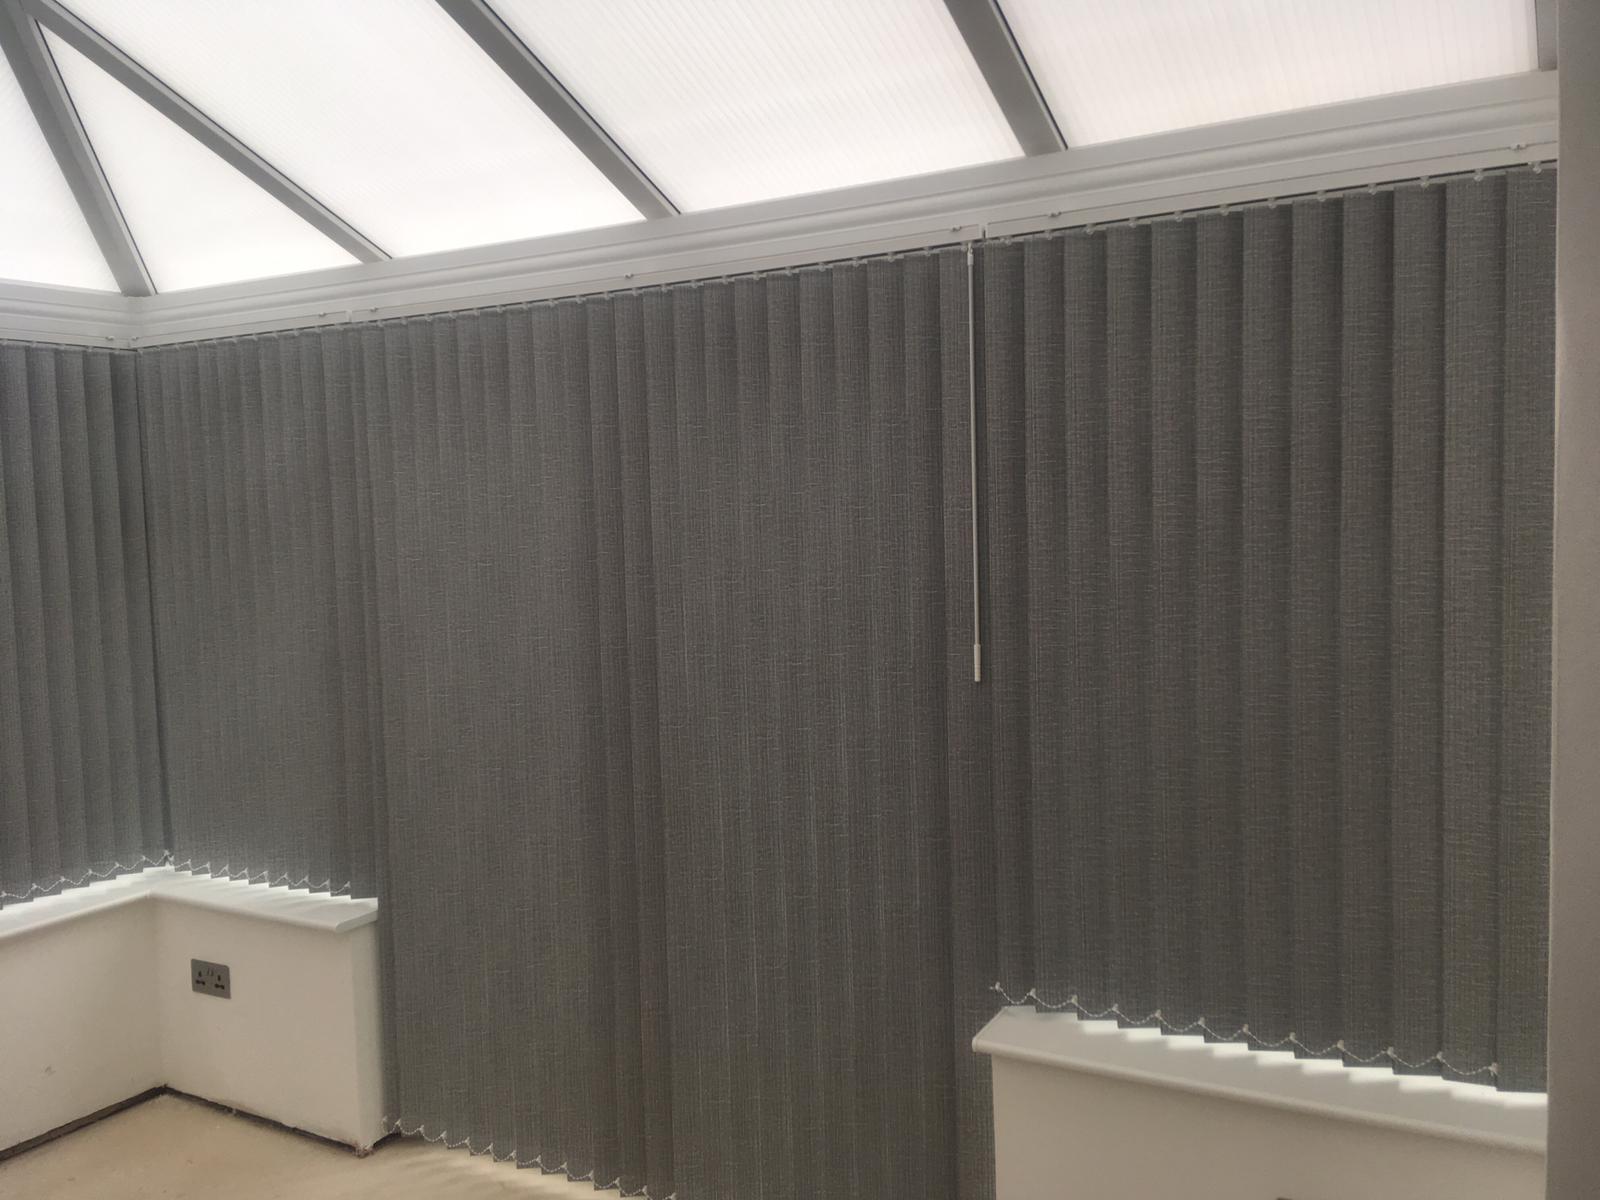 UK Suppliers of Pet-Friendly Vertical Blinds Options